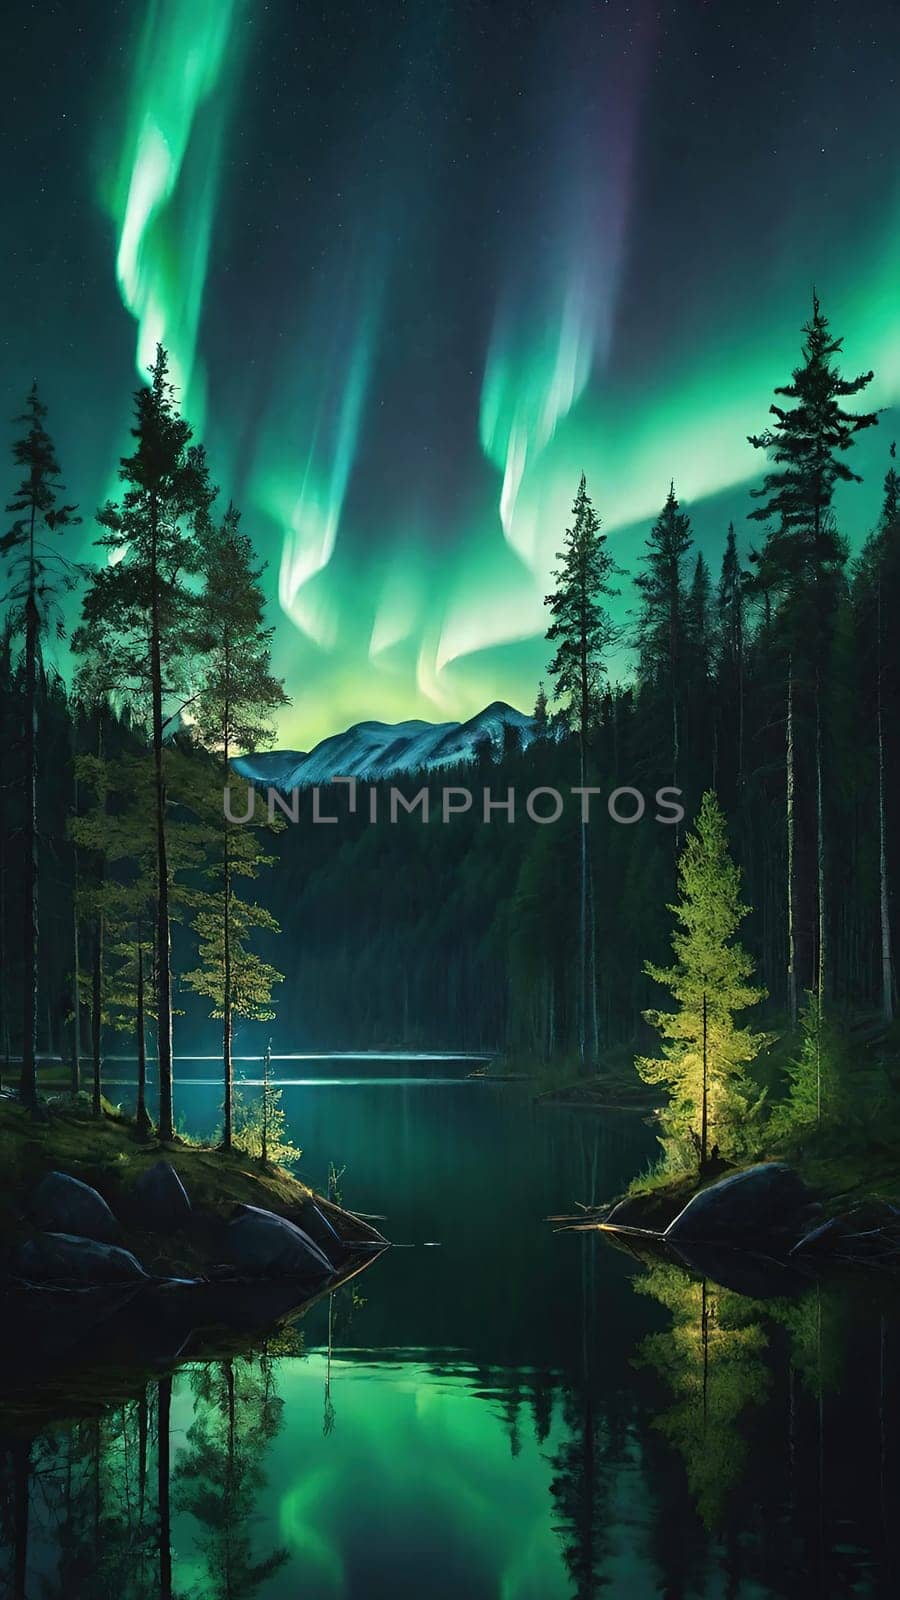 Aurora borealis, northern lights over lake and forest. Nature background and wallpaper.Vertical image.Under the Northern Lights: Enchanting Forest and Lake Scenery in Nature's Embrace